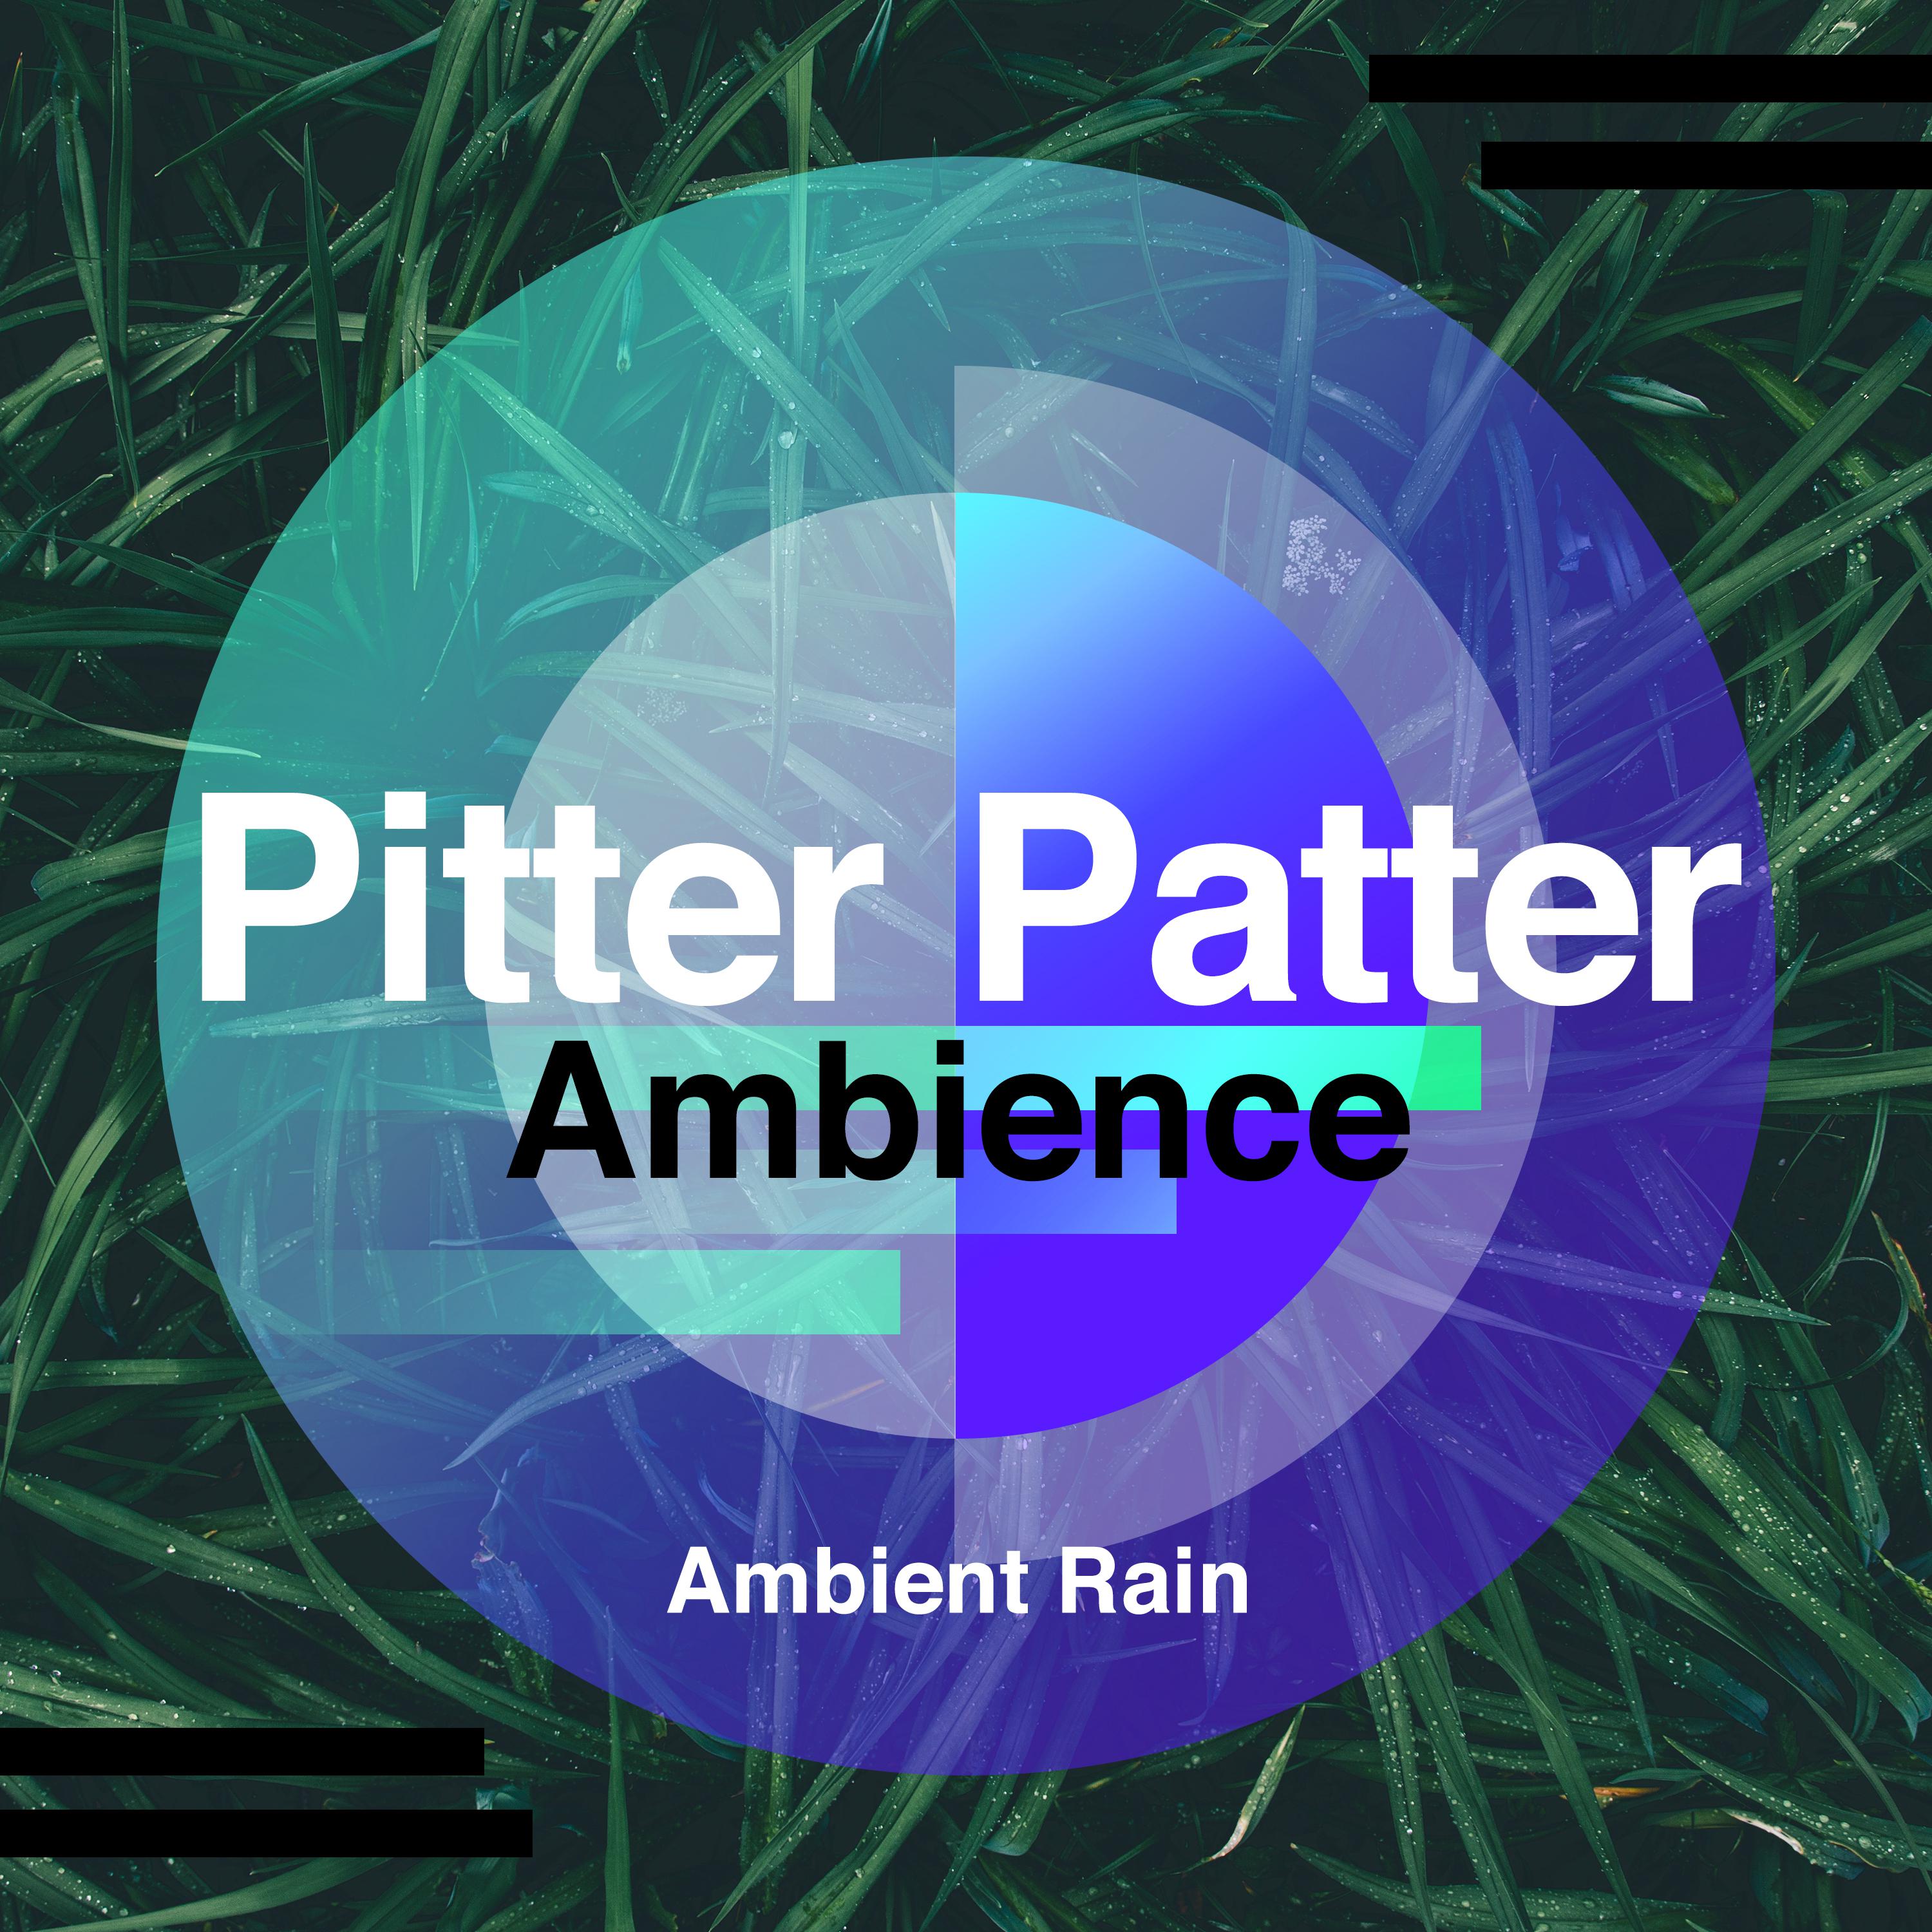 Pitter Patter Ambience